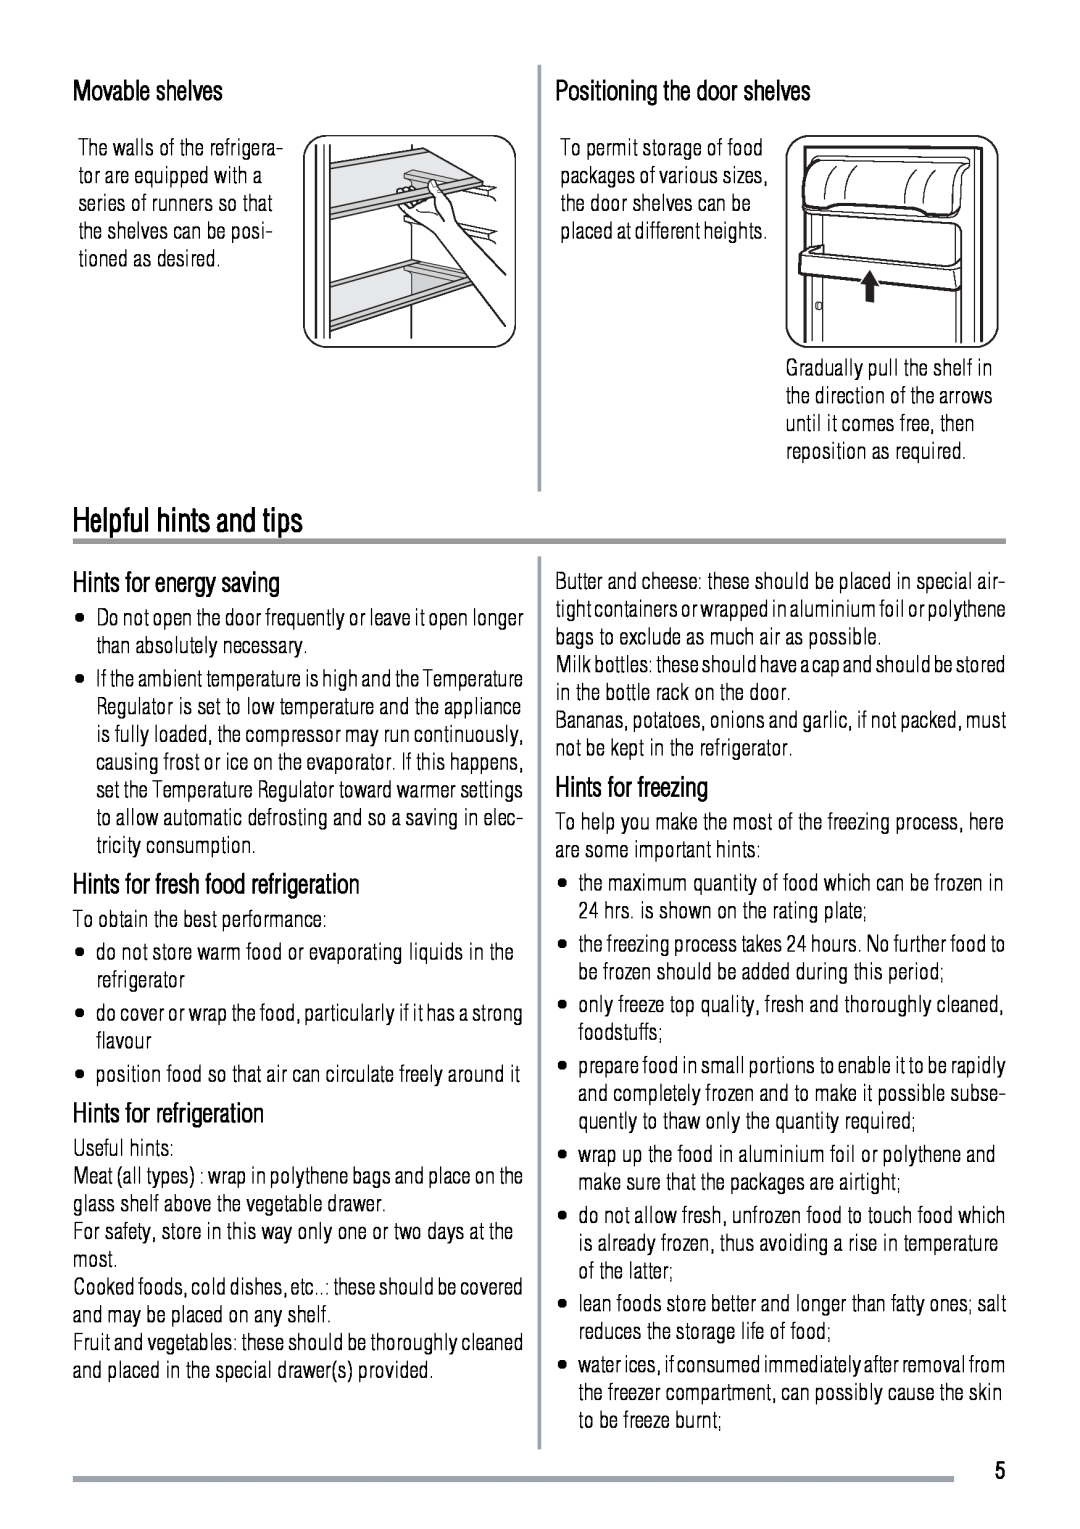 Zanussi ZBA3224A user manual Helpful hints and tips, Movable shelves, Positioning the door shelves, Hints for energy saving 